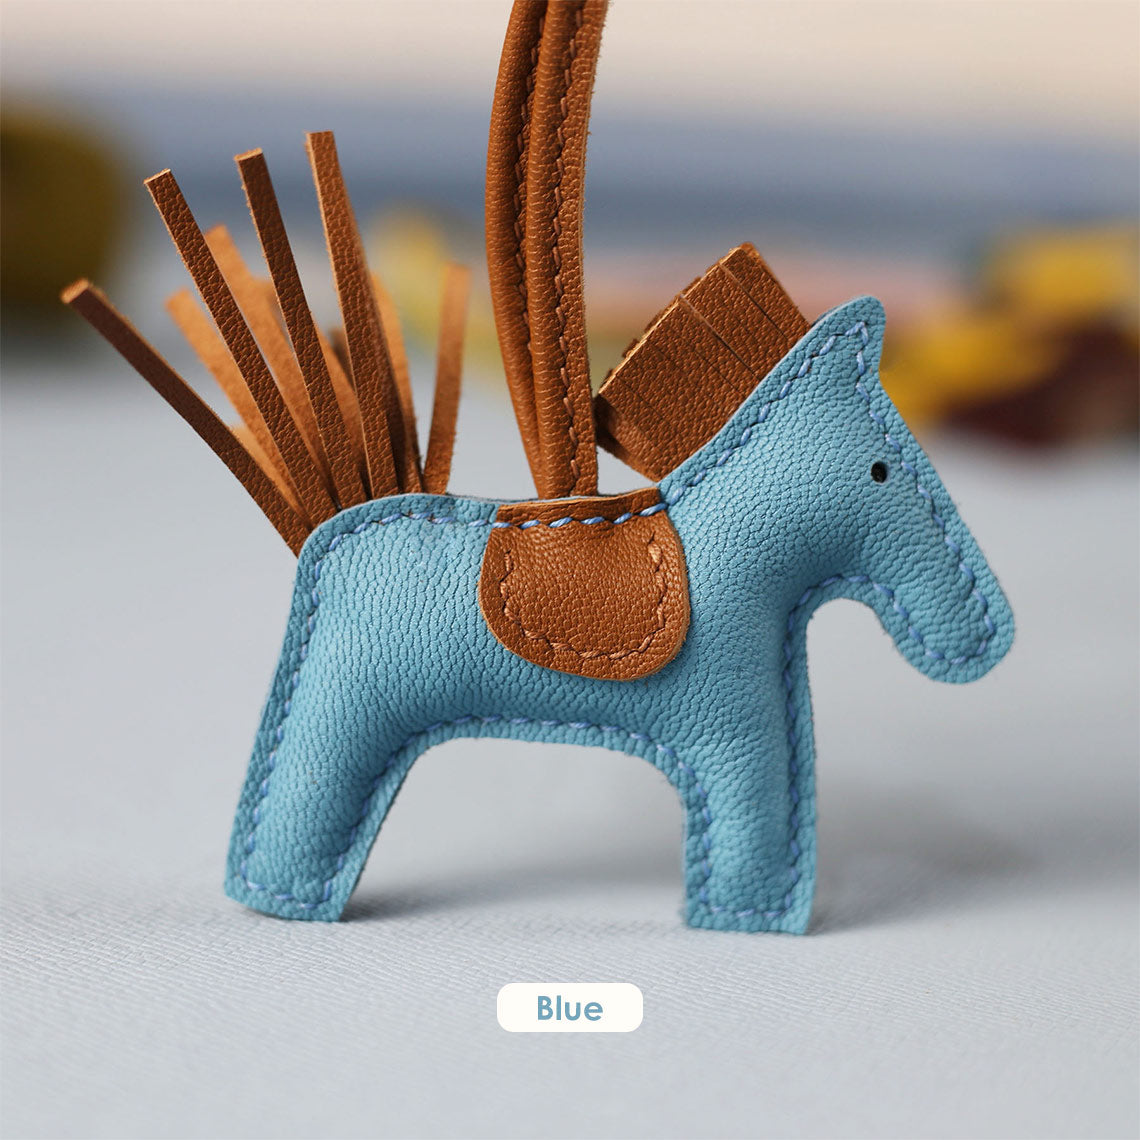 Blue Leather Rodeo Horse Bag Charm Keychain | Luxury Bag Accessories for Affordable Price - POPSEWING™